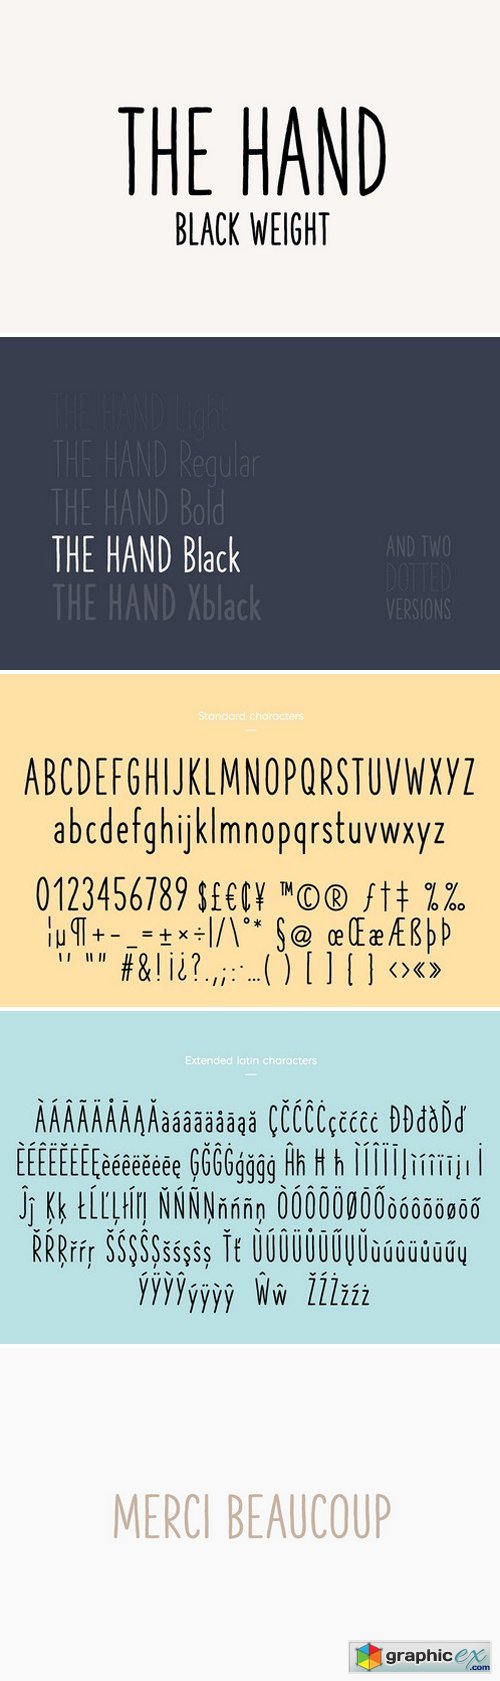 The Hand Font - Black